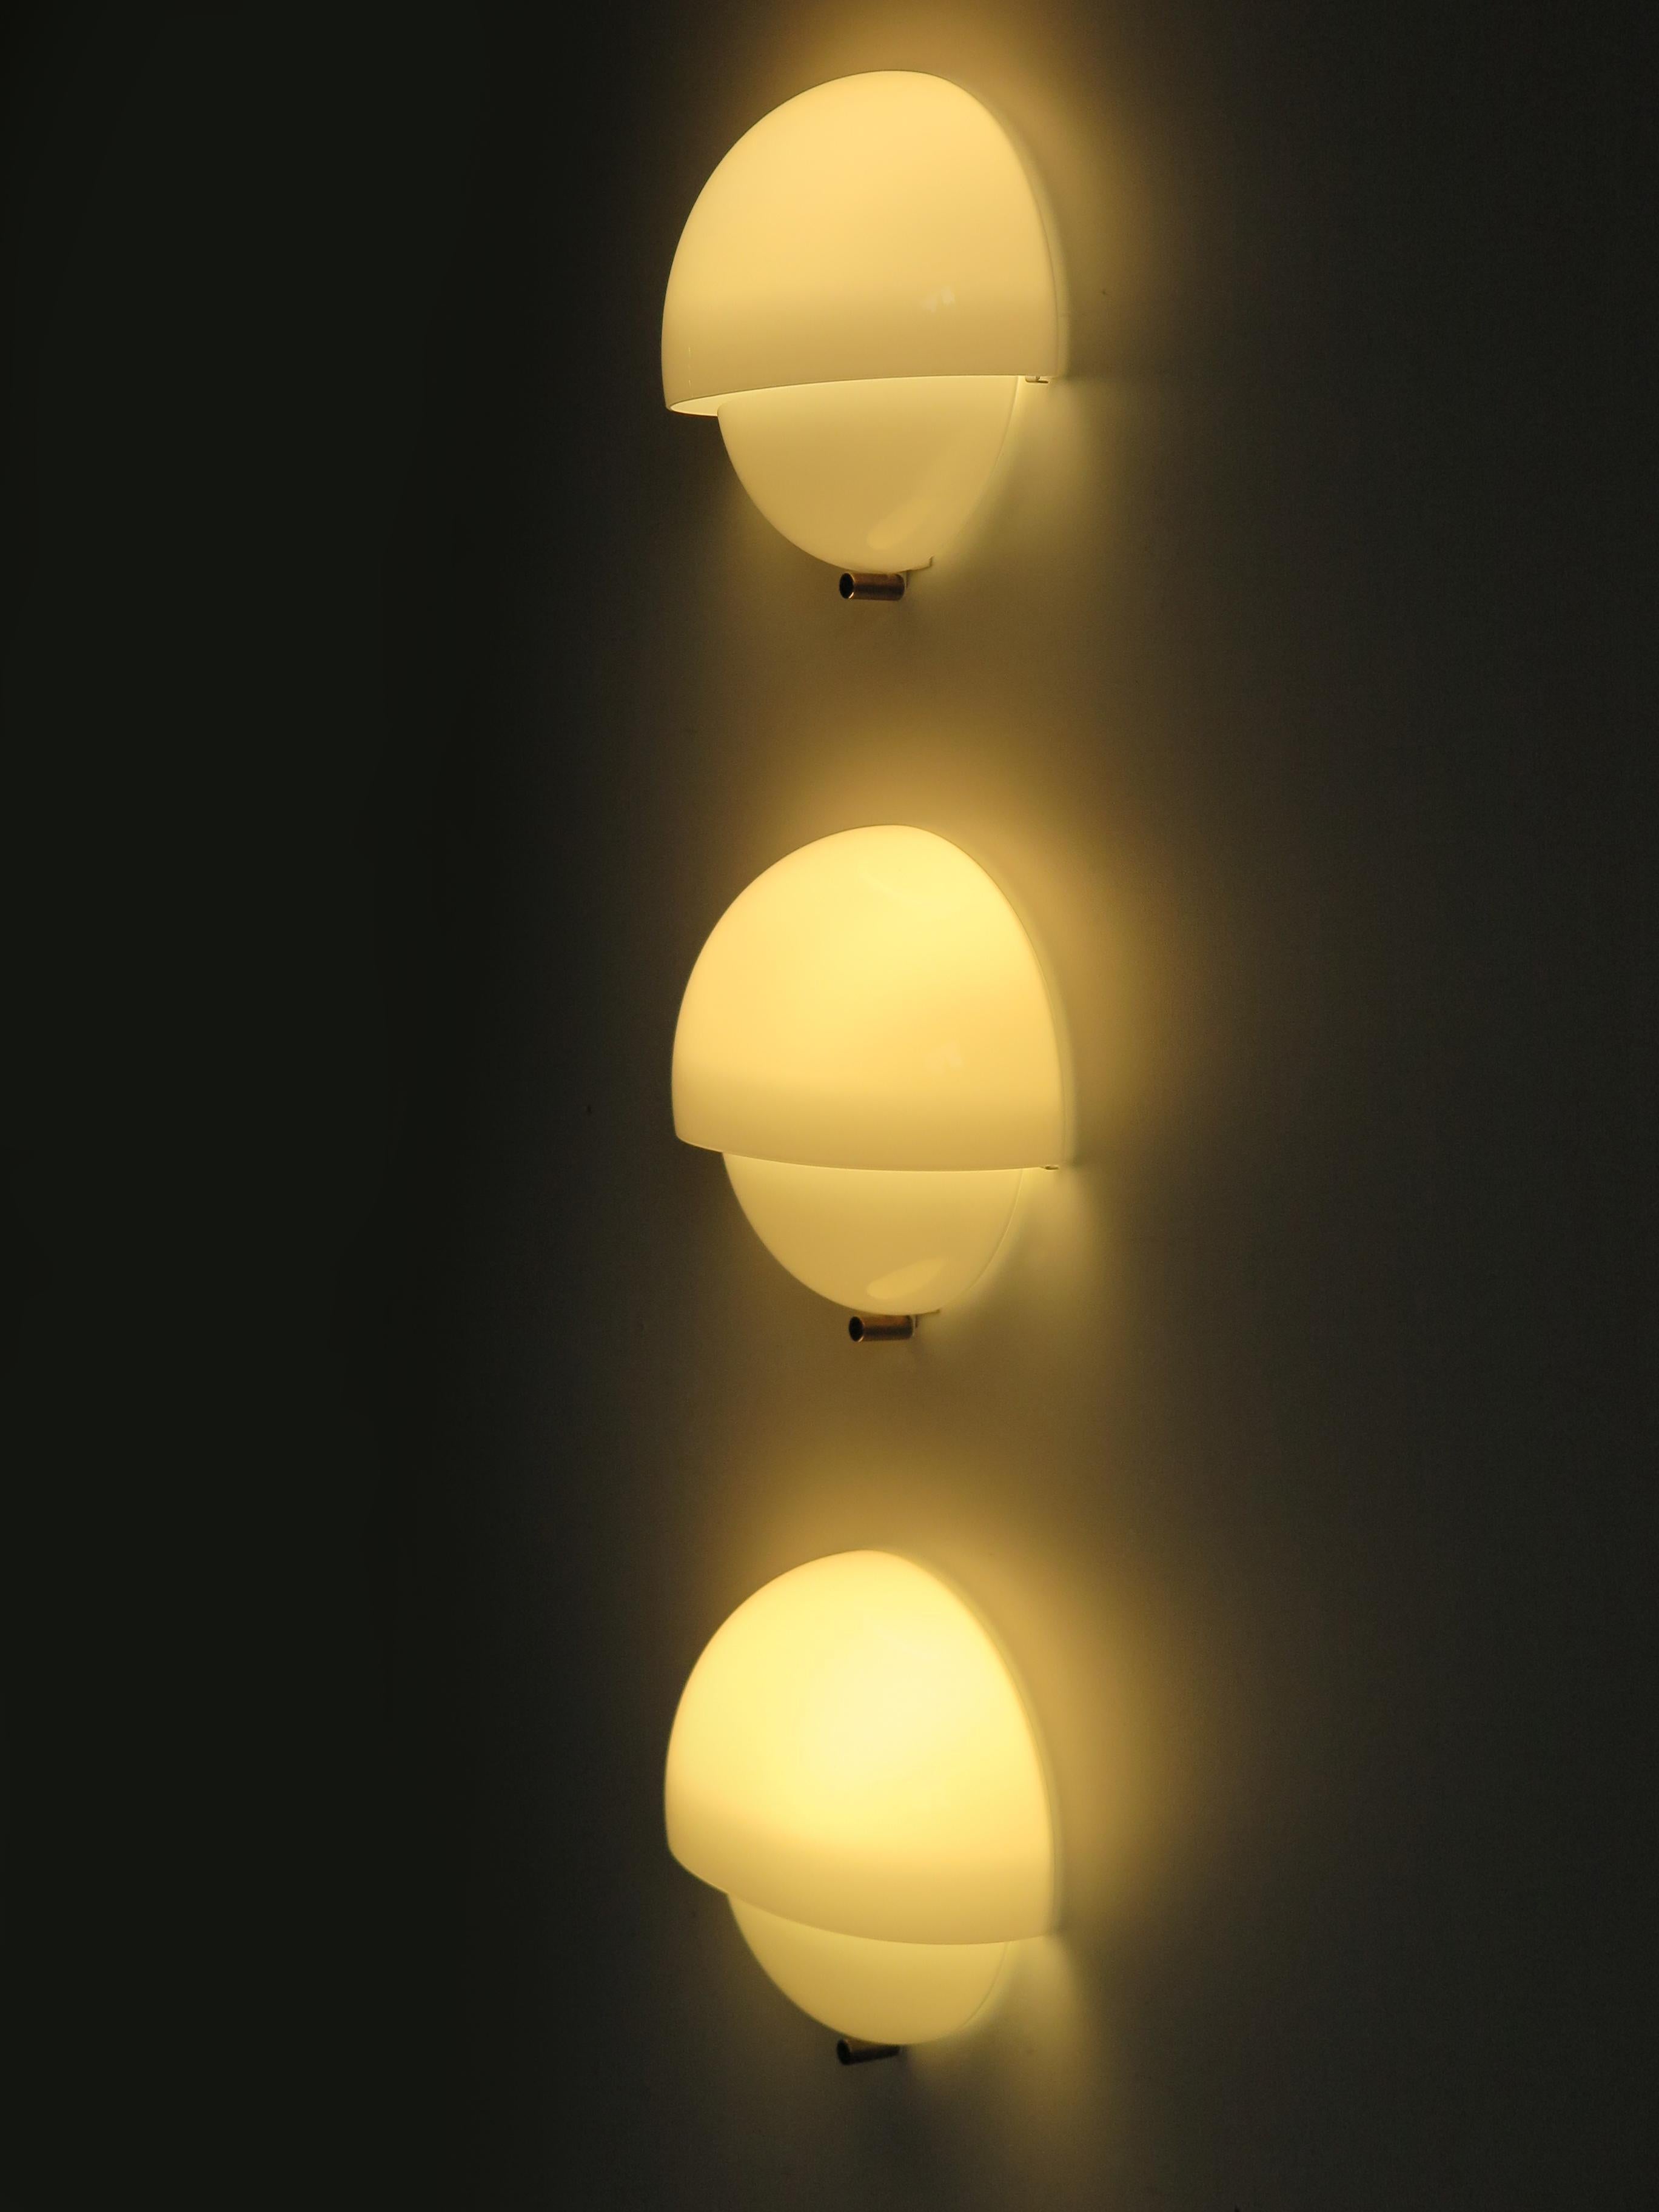 Set of three Italian sconces or wall lamps model Mania designed by italian designer Vico Magistretti for Artemide in 1963 model with white opaline Murano glass (see sticker) and brass detail, 1960s
XIII Triennale.
Bibliography:
Repertorio del